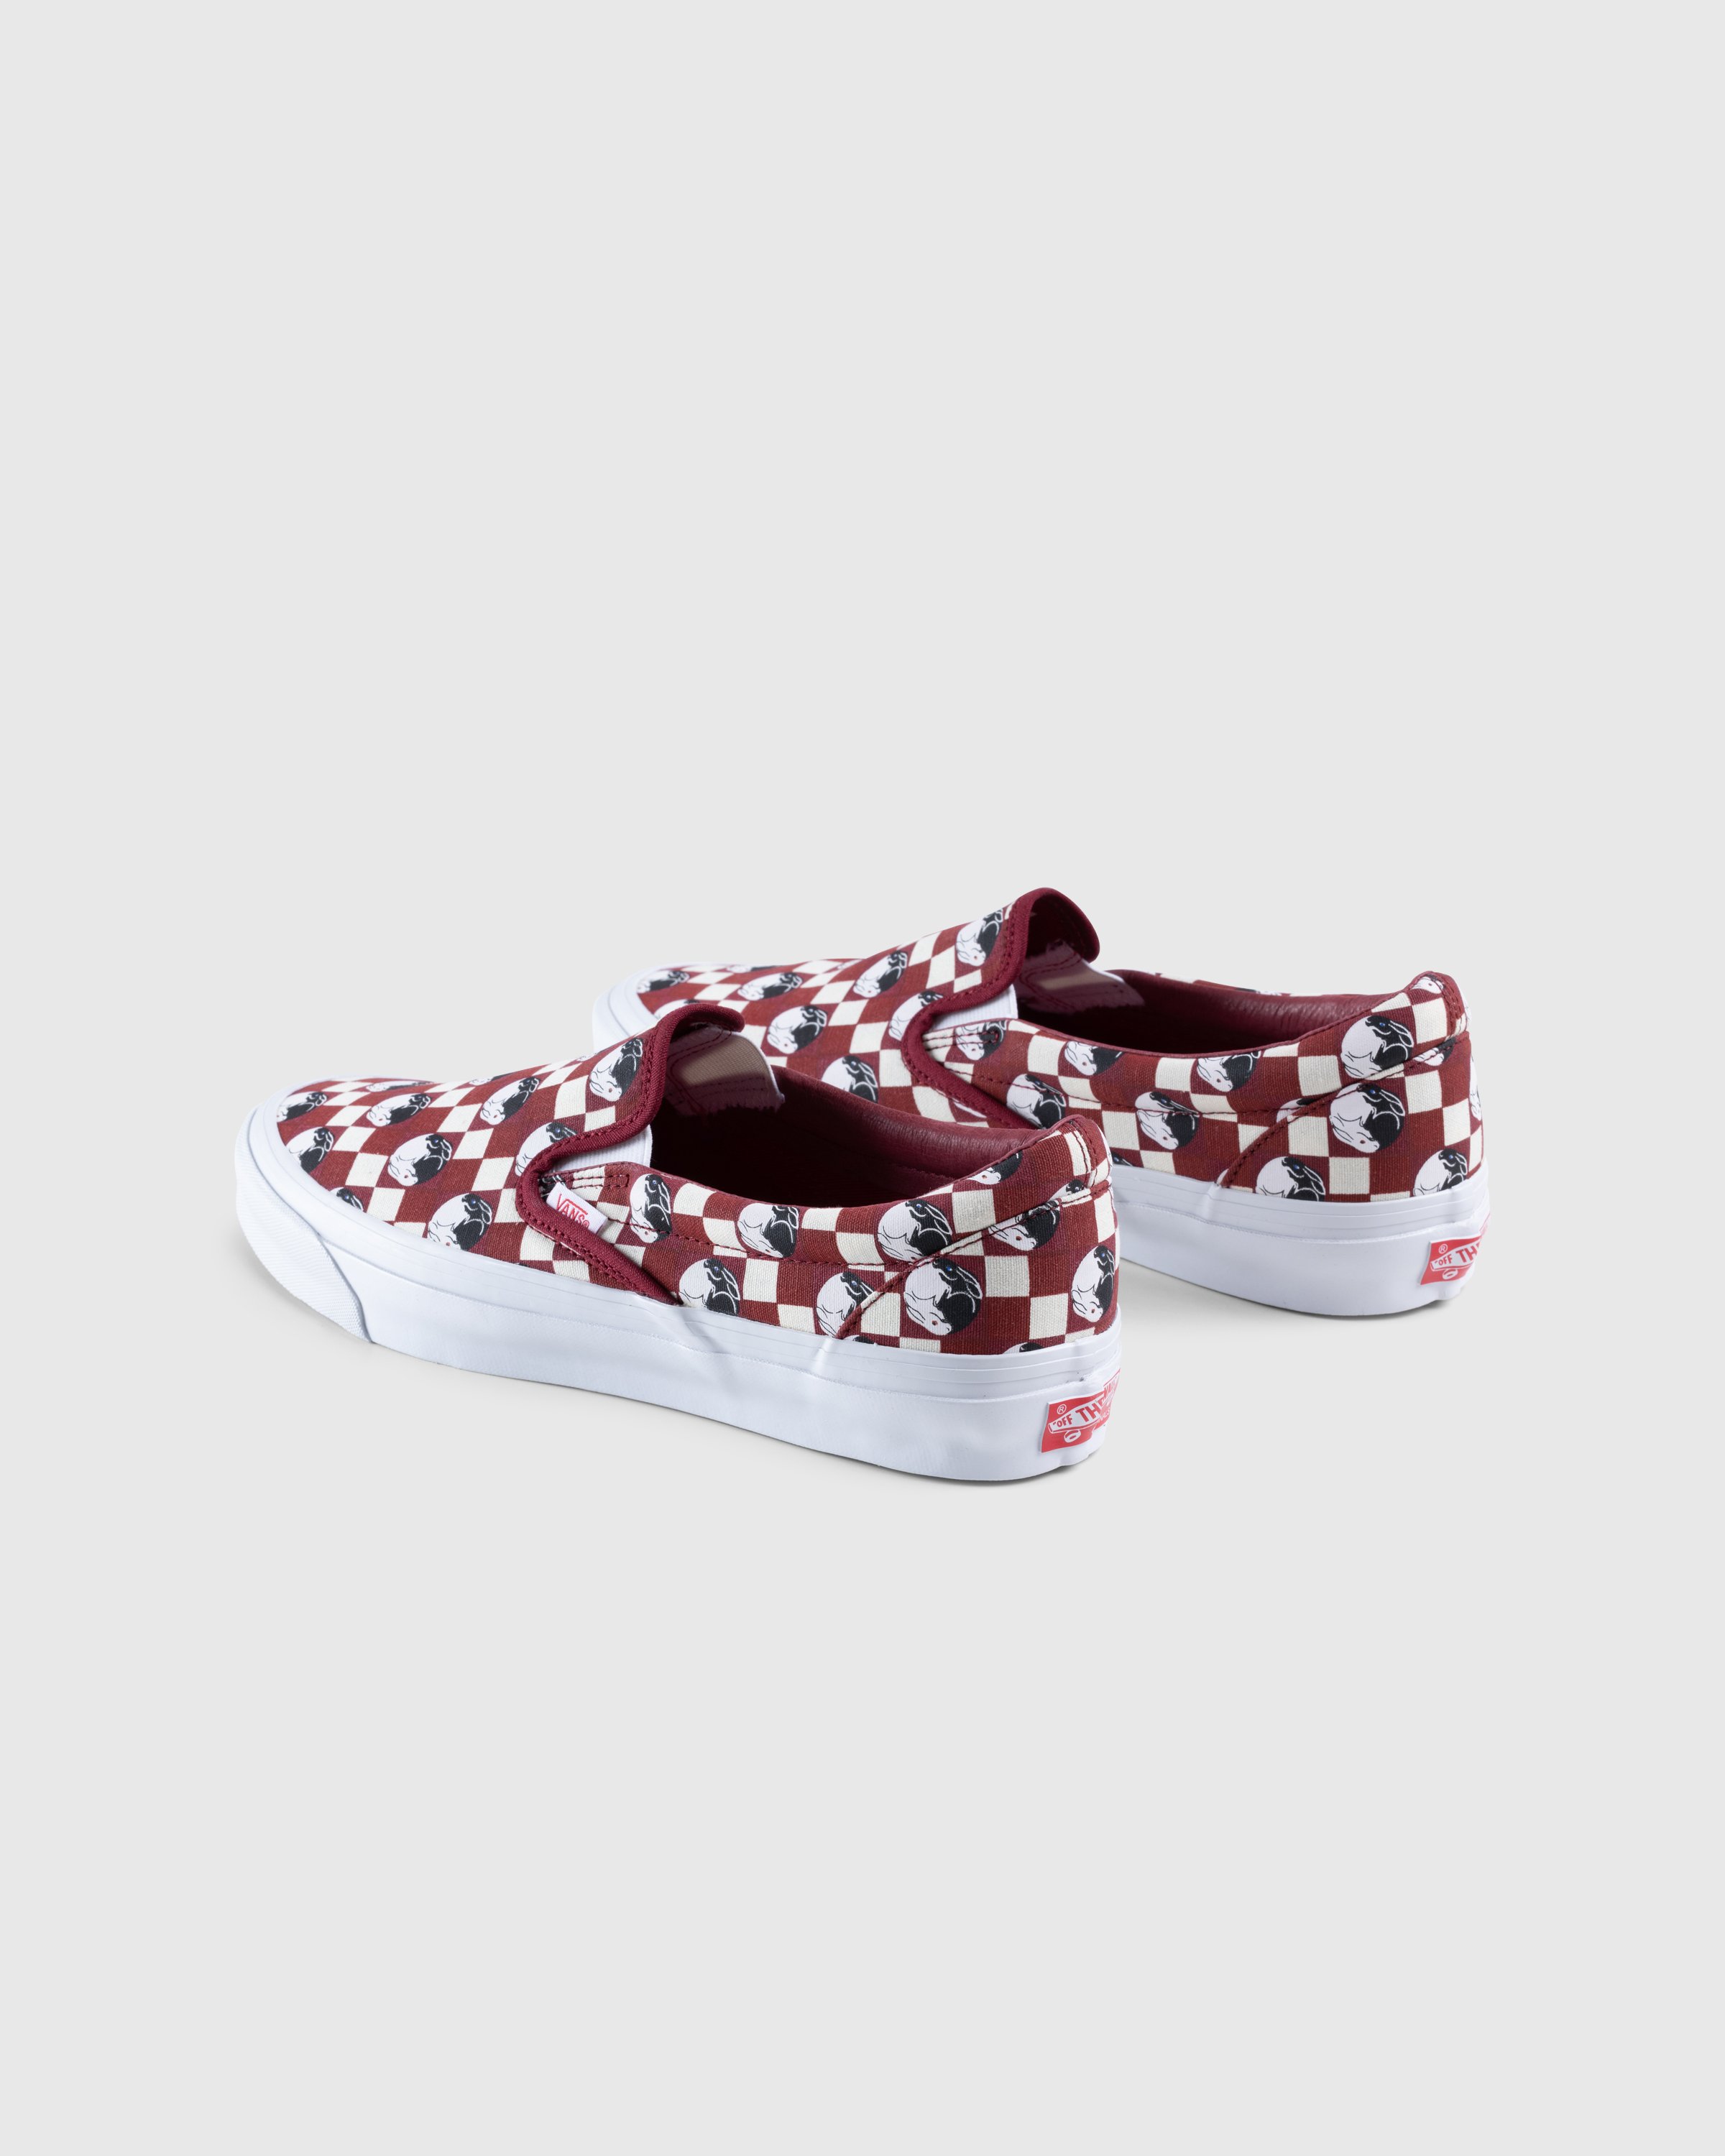 Vans - UA OG Classic Slip-On Year of the Rabbit Red - Footwear - Red - Image 4